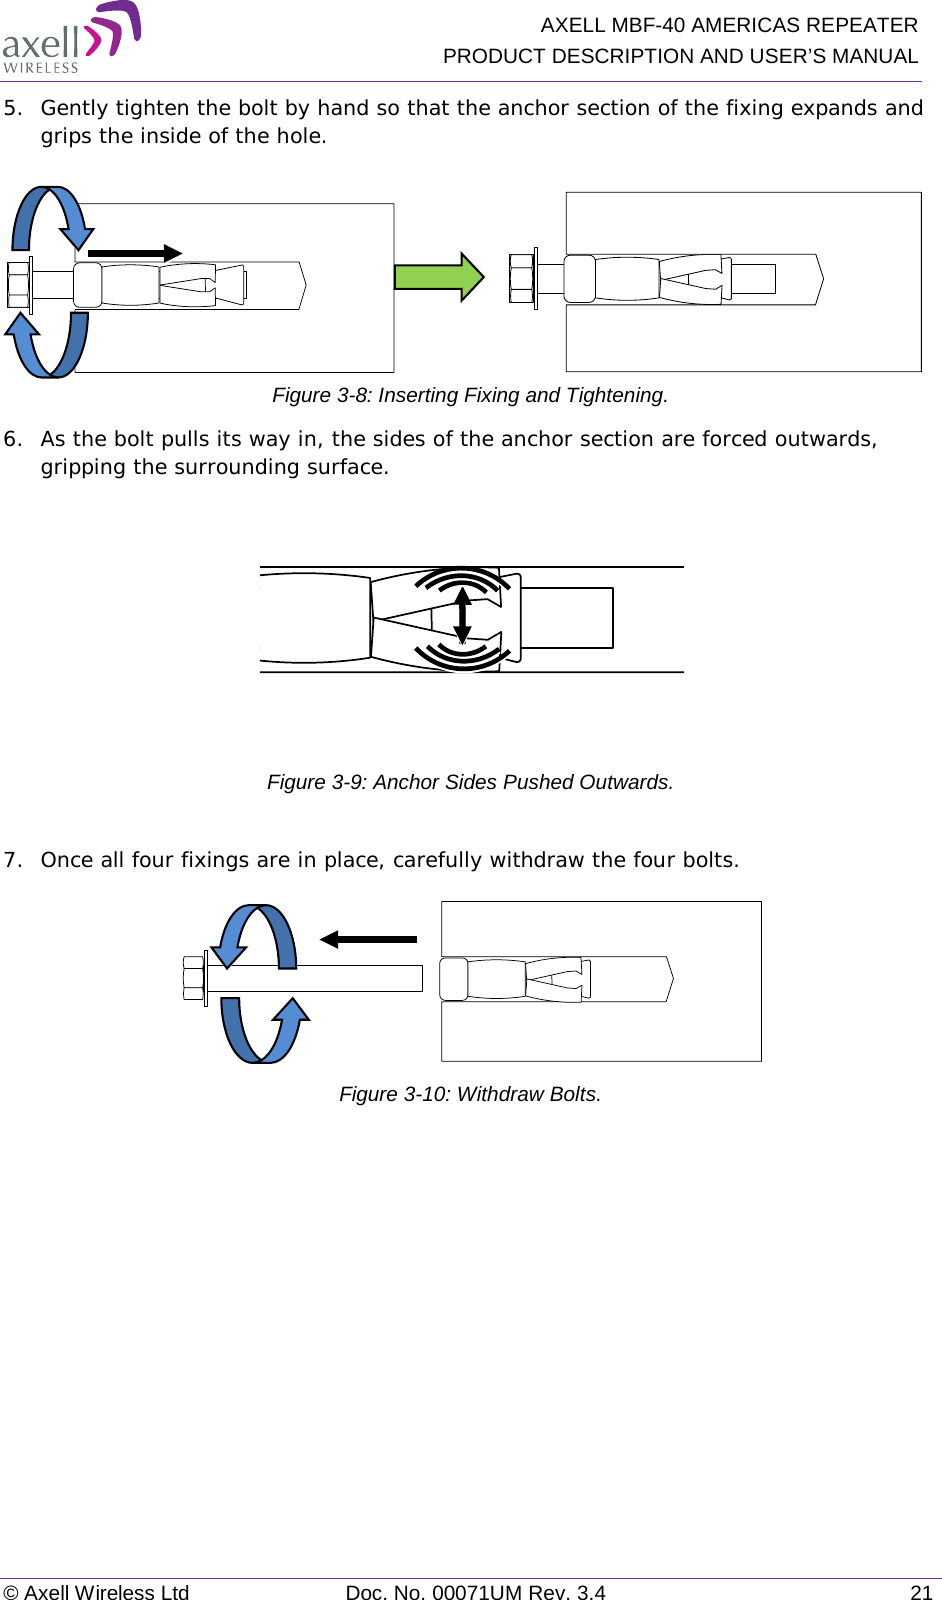   AXELL MBF-40 AMERICAS REPEATER PRODUCT DESCRIPTION AND USER’S MANUAL © Axell Wireless Ltd Doc. No. 00071UM Rev. 3.4 21 5.  Gently tighten the bolt by hand so that the anchor section of the fixing expands and grips the inside of the hole.                   Figure  3-8: Inserting Fixing and Tightening. 6.  As the bolt pulls its way in, the sides of the anchor section are forced outwards, gripping the surrounding surface.  Figure  3-9: Anchor Sides Pushed Outwards.  7.  Once all four fixings are in place, carefully withdraw the four bolts.   Figure  3-10: Withdraw Bolts.   